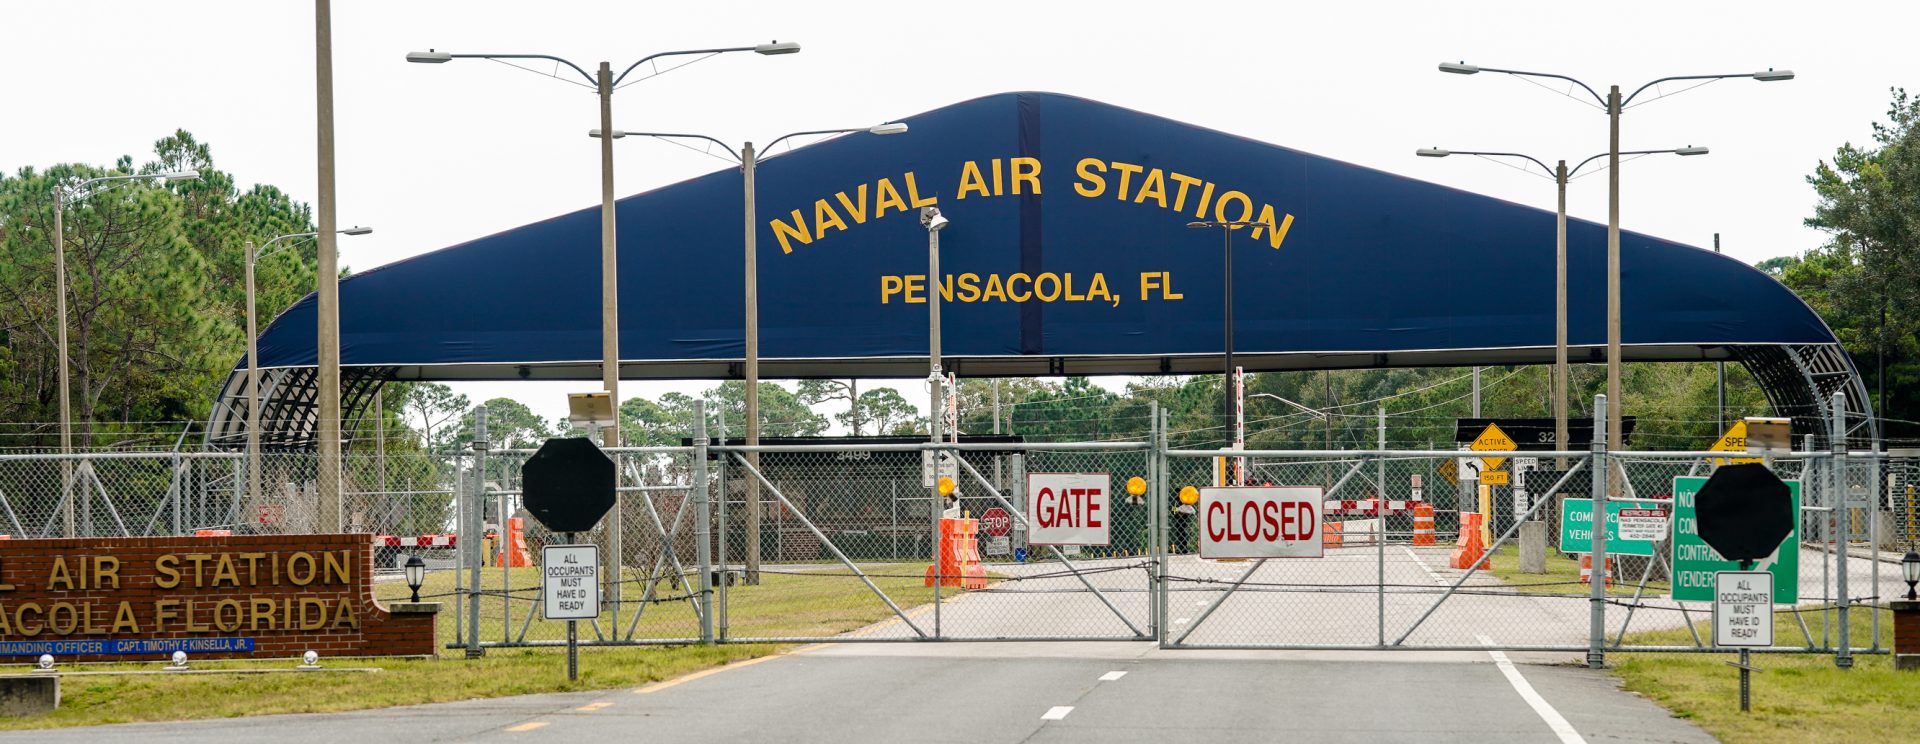 Three sailors were killed and eight injured in a shooting at the Pensacola Naval Air Station on Friday in Florida. The FBI is investigating the attack as an act of terrorism.